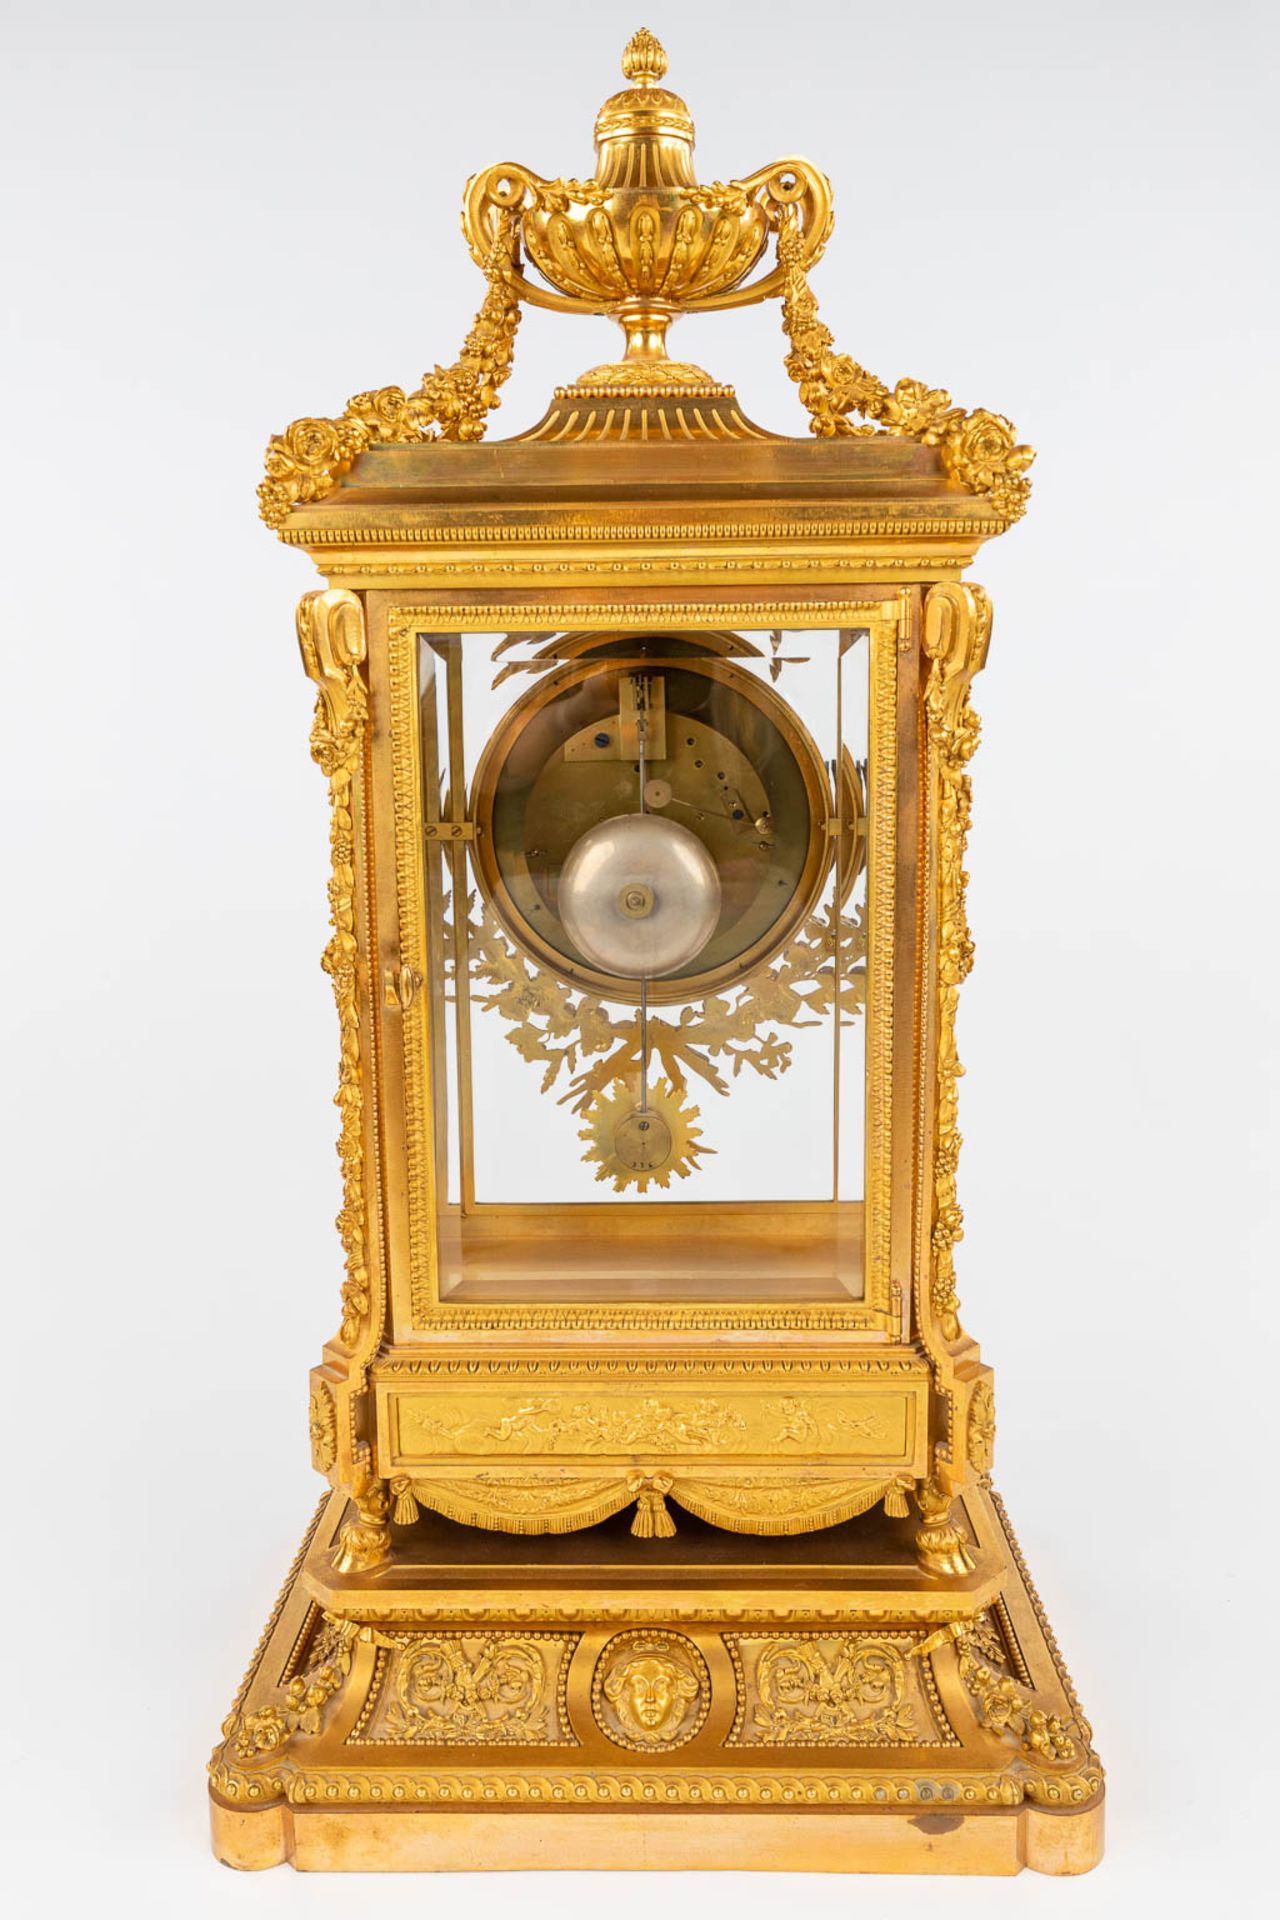 An imposing three-piece mantle garniture clock and candelabra, gilt bronze in Louis XVI style. Maiso - Image 14 of 38